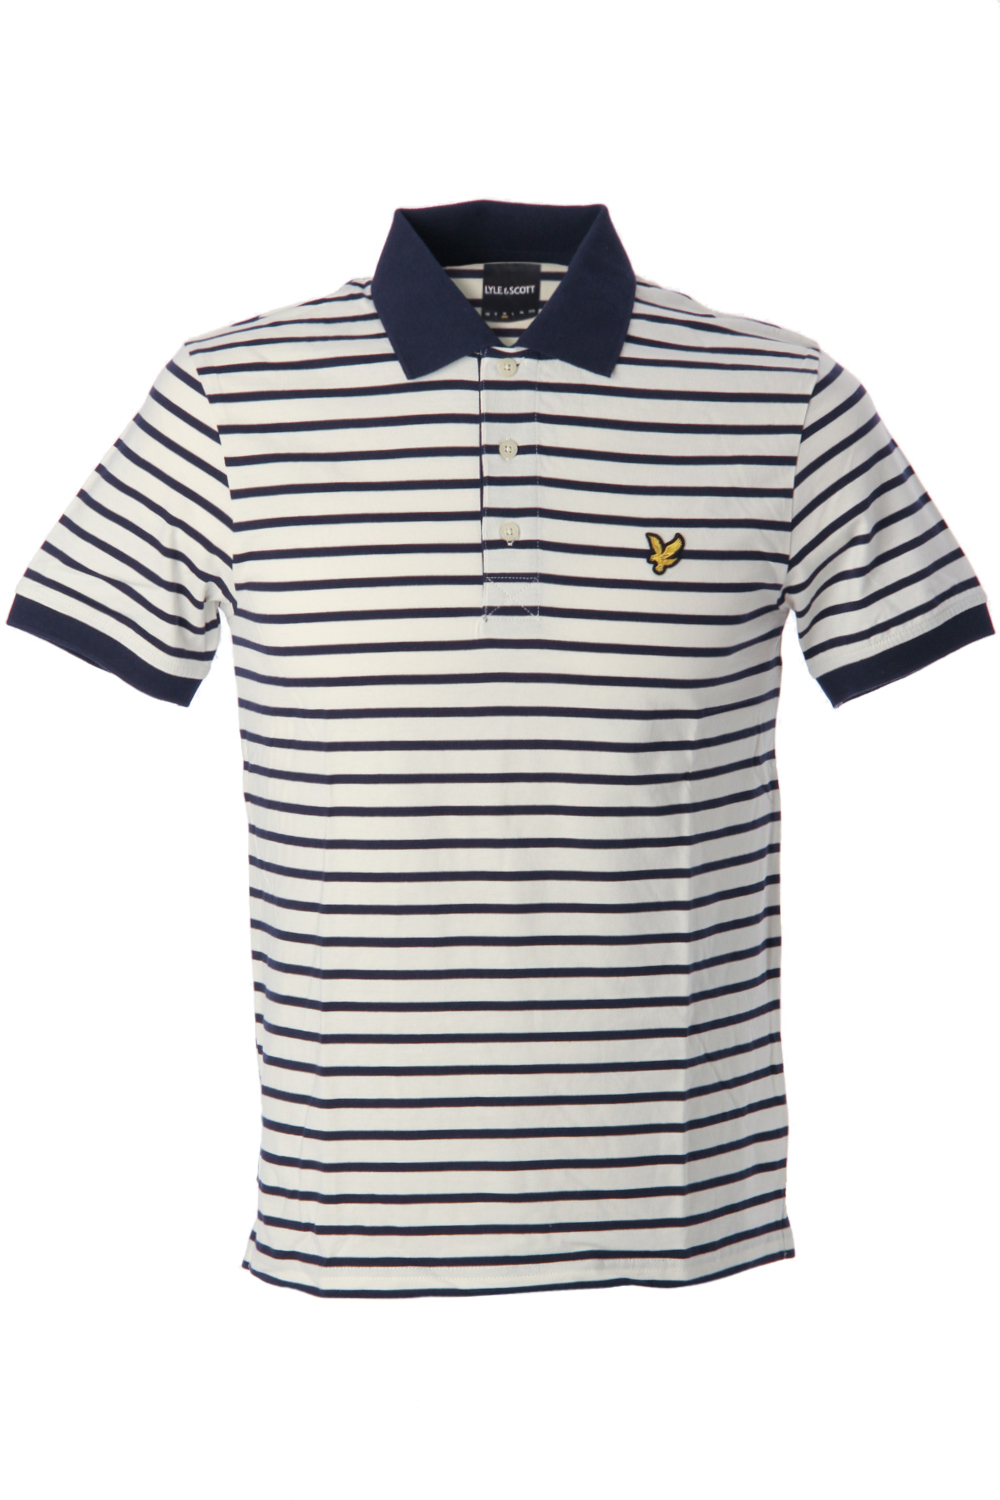 Lyle and Scott T-shir